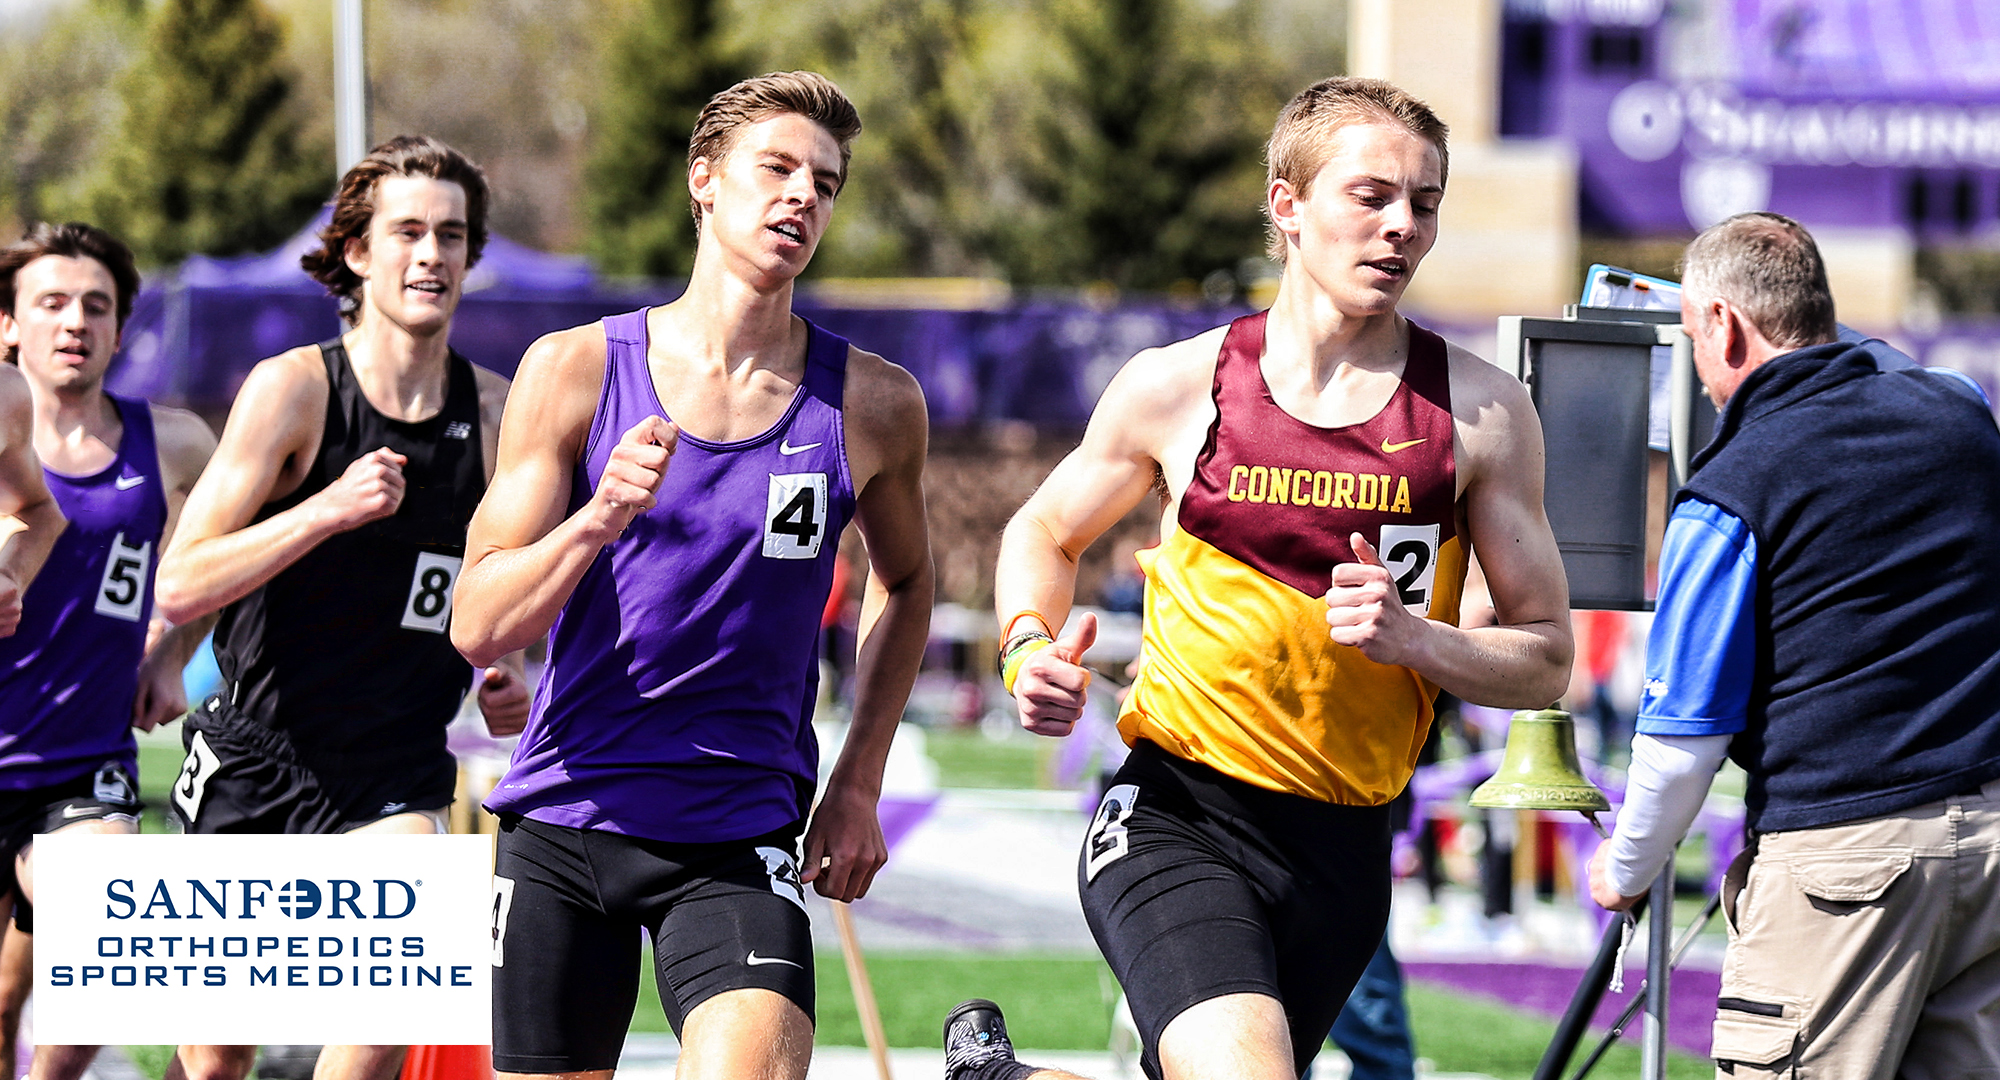 Jesse Middendorf was the only non-Division I winner of a track event at the NDSU Spring Classic. He won the 800 meters in the second fastest time in school history.